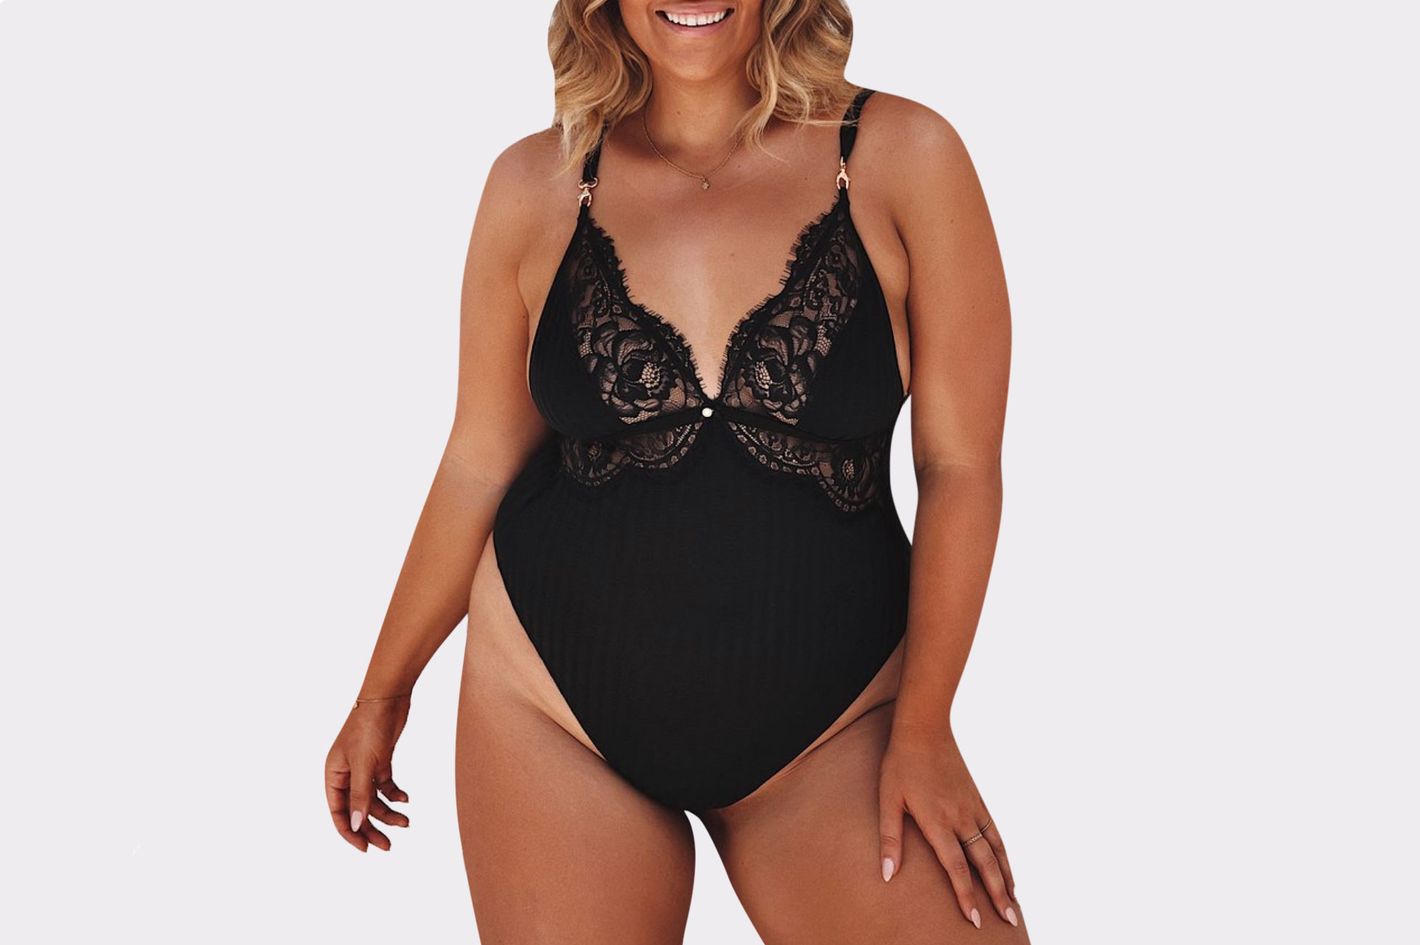 coby george recommends big booty women in lingerie pic